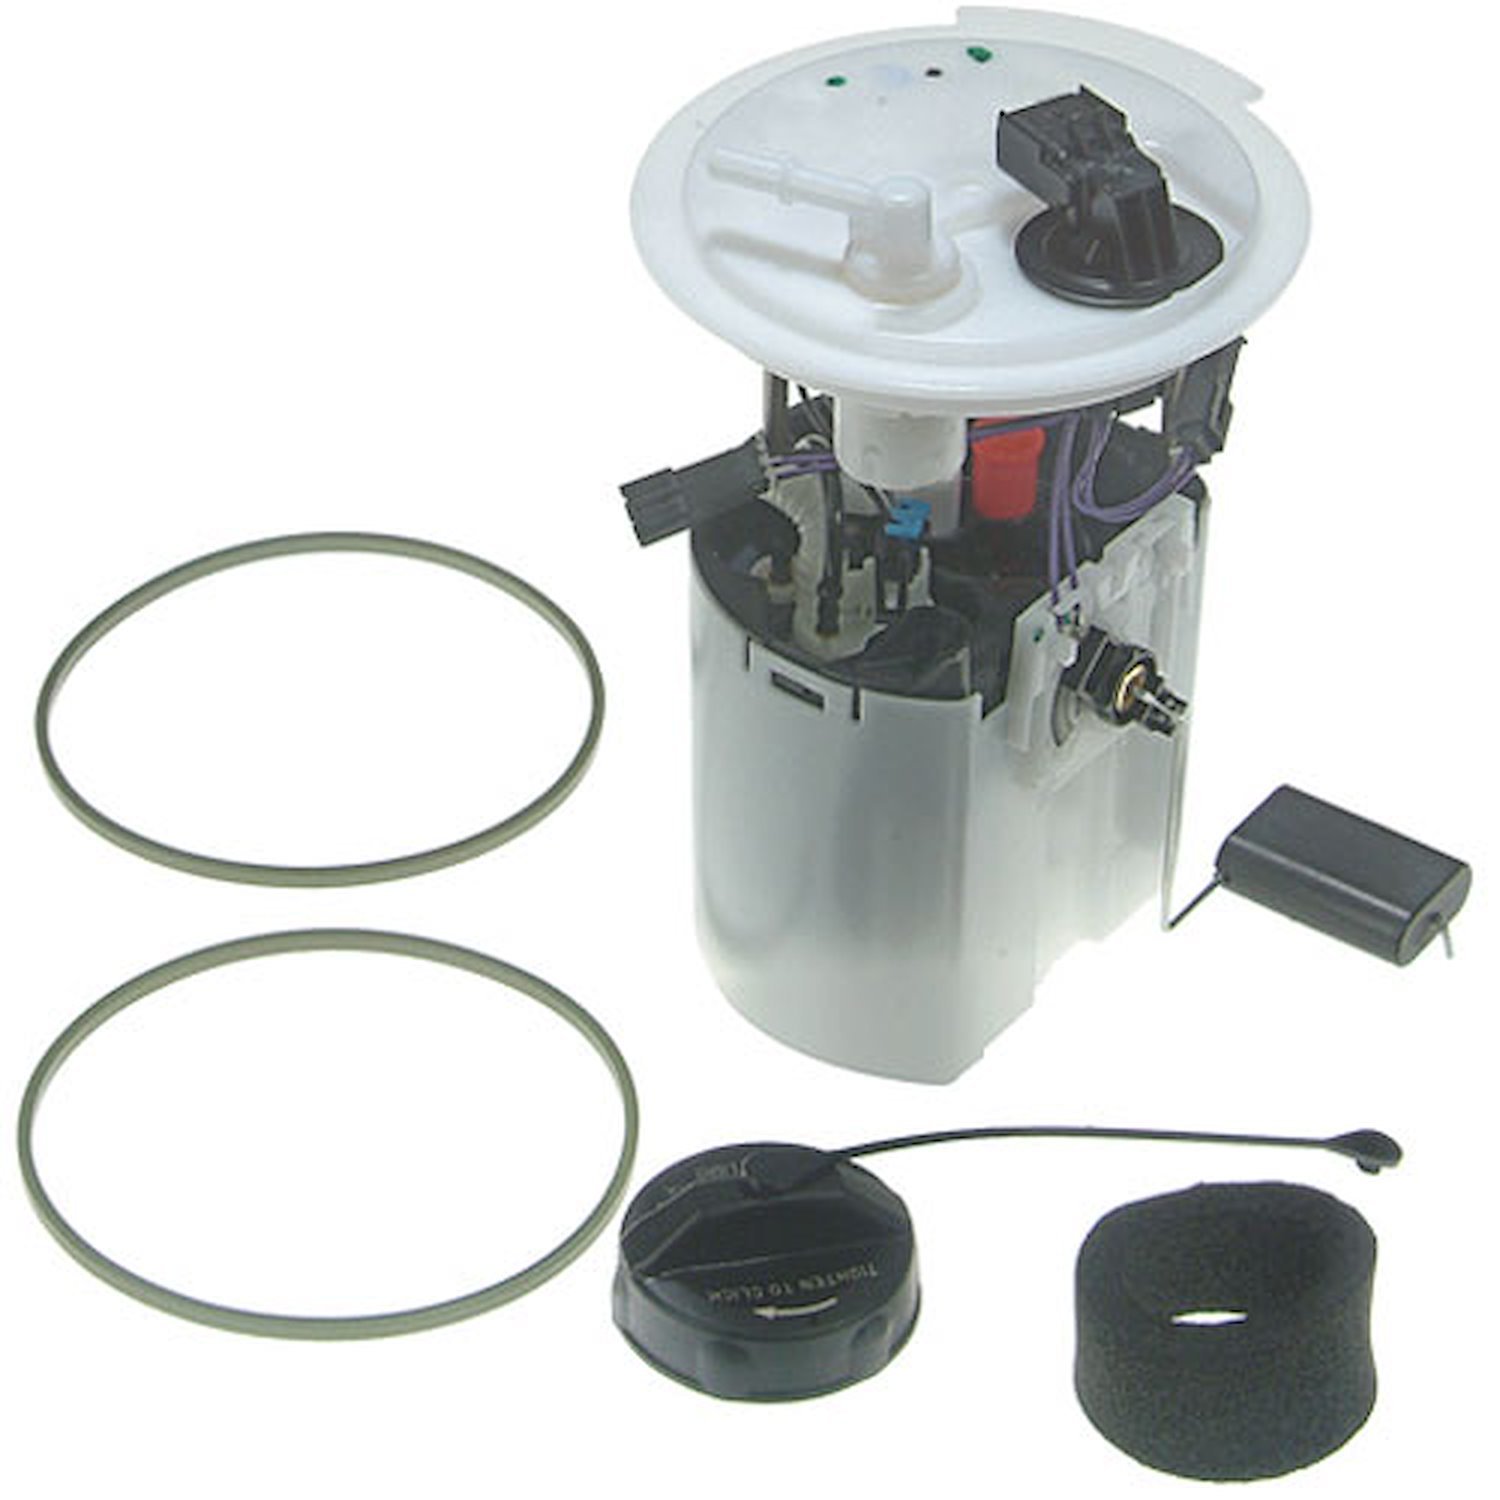 OE Chrysler/Dodge Replacement Electric Fuel Pump Module Assembly 2004-06 Chrysler Pacifica 3.5L/3.8L V6